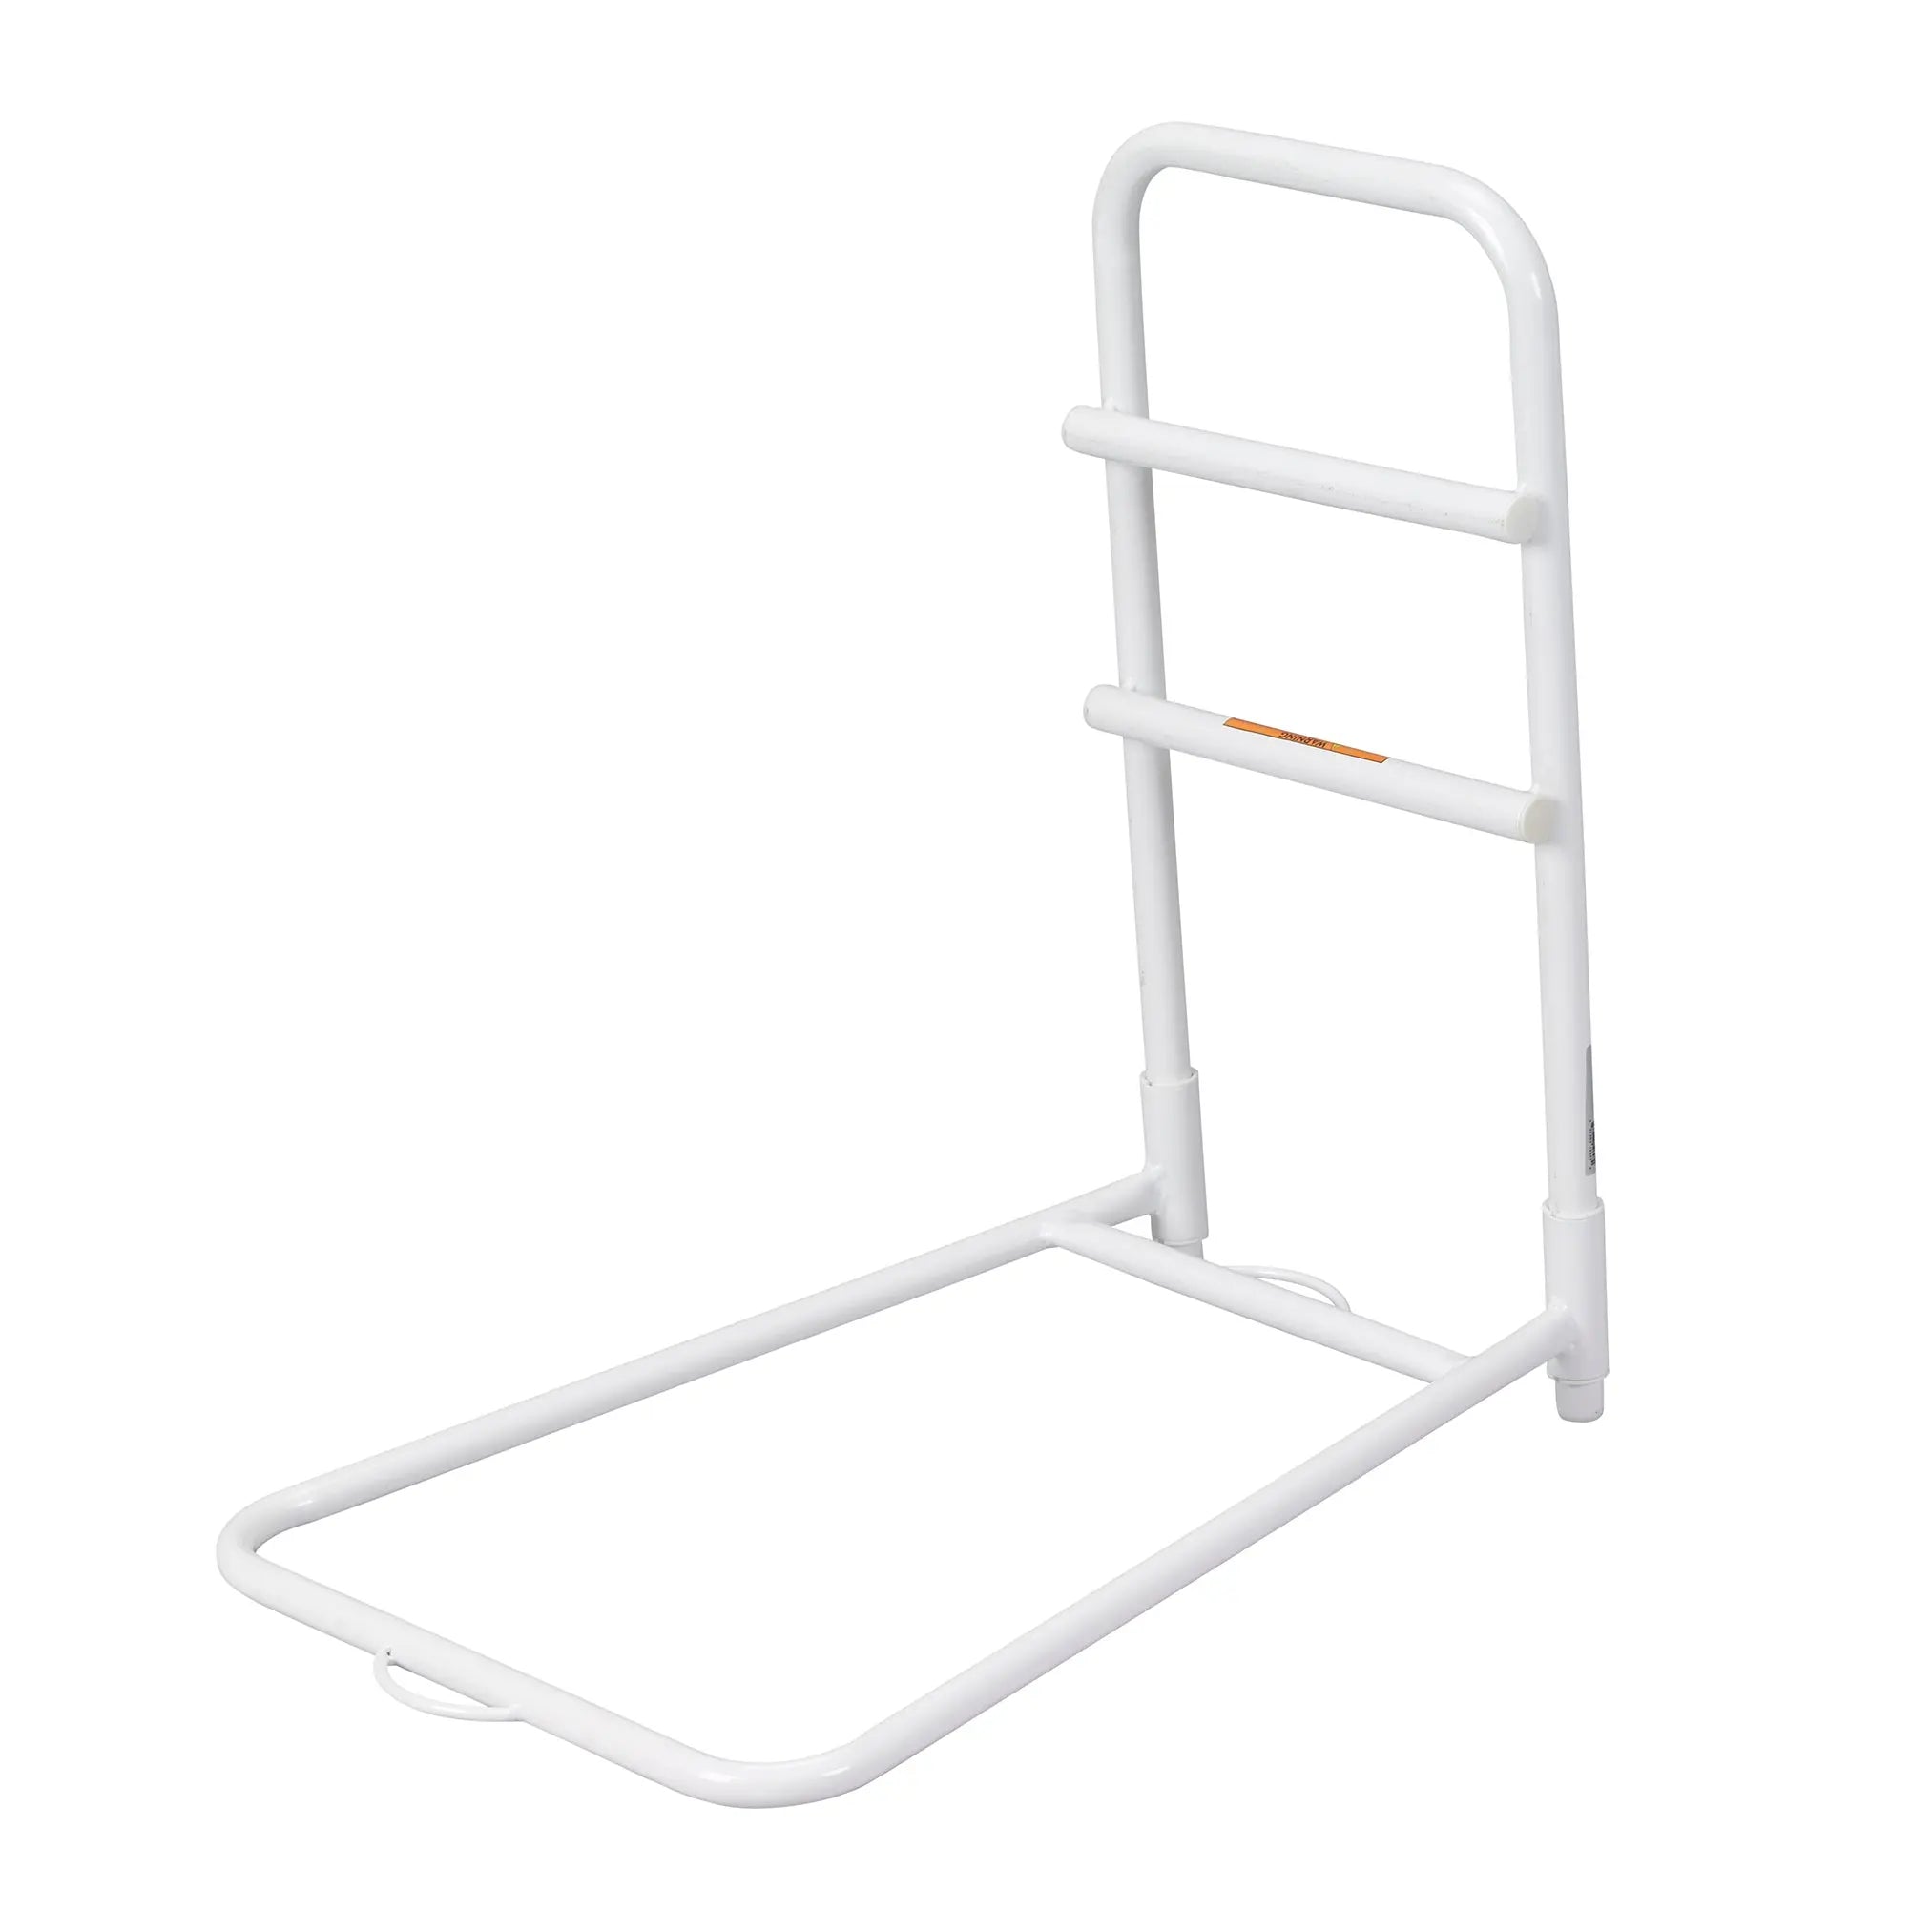 Home Bed Assist Rail - Home Health Store Inc